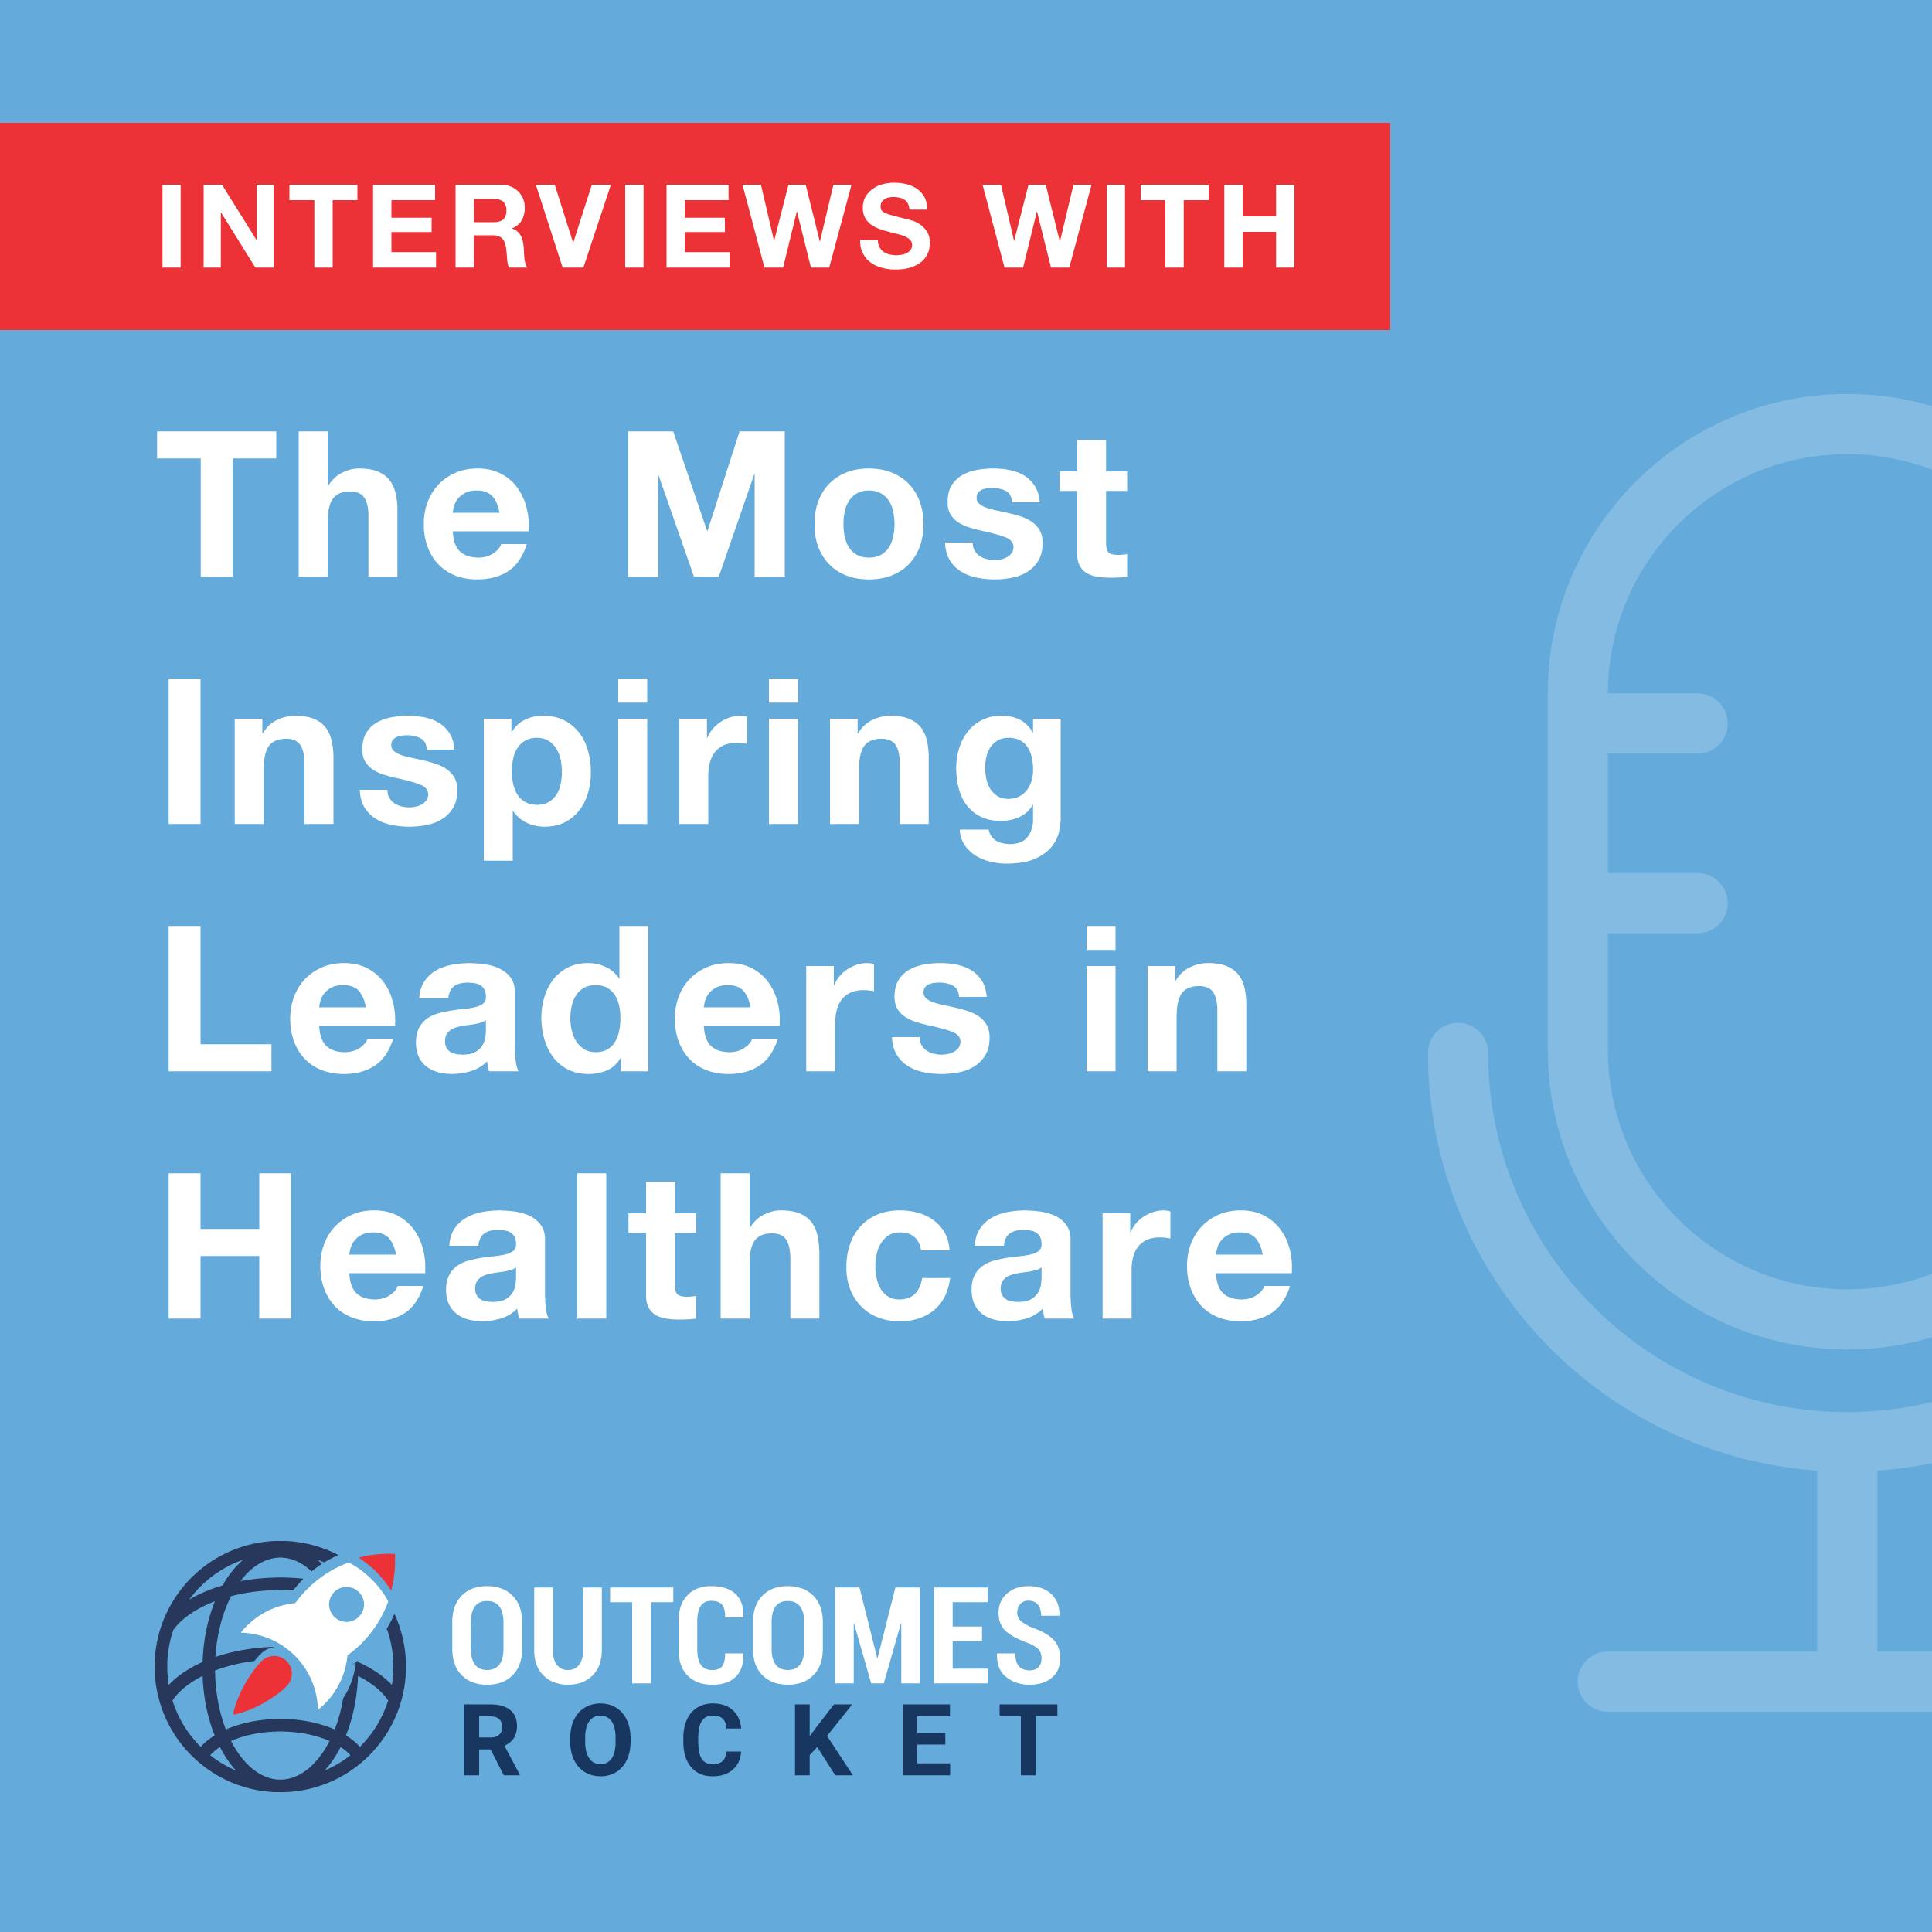 Finding Affordable Quality Healthcare with Kevin Krauth, Co-Founder and CEO at Orderly Health